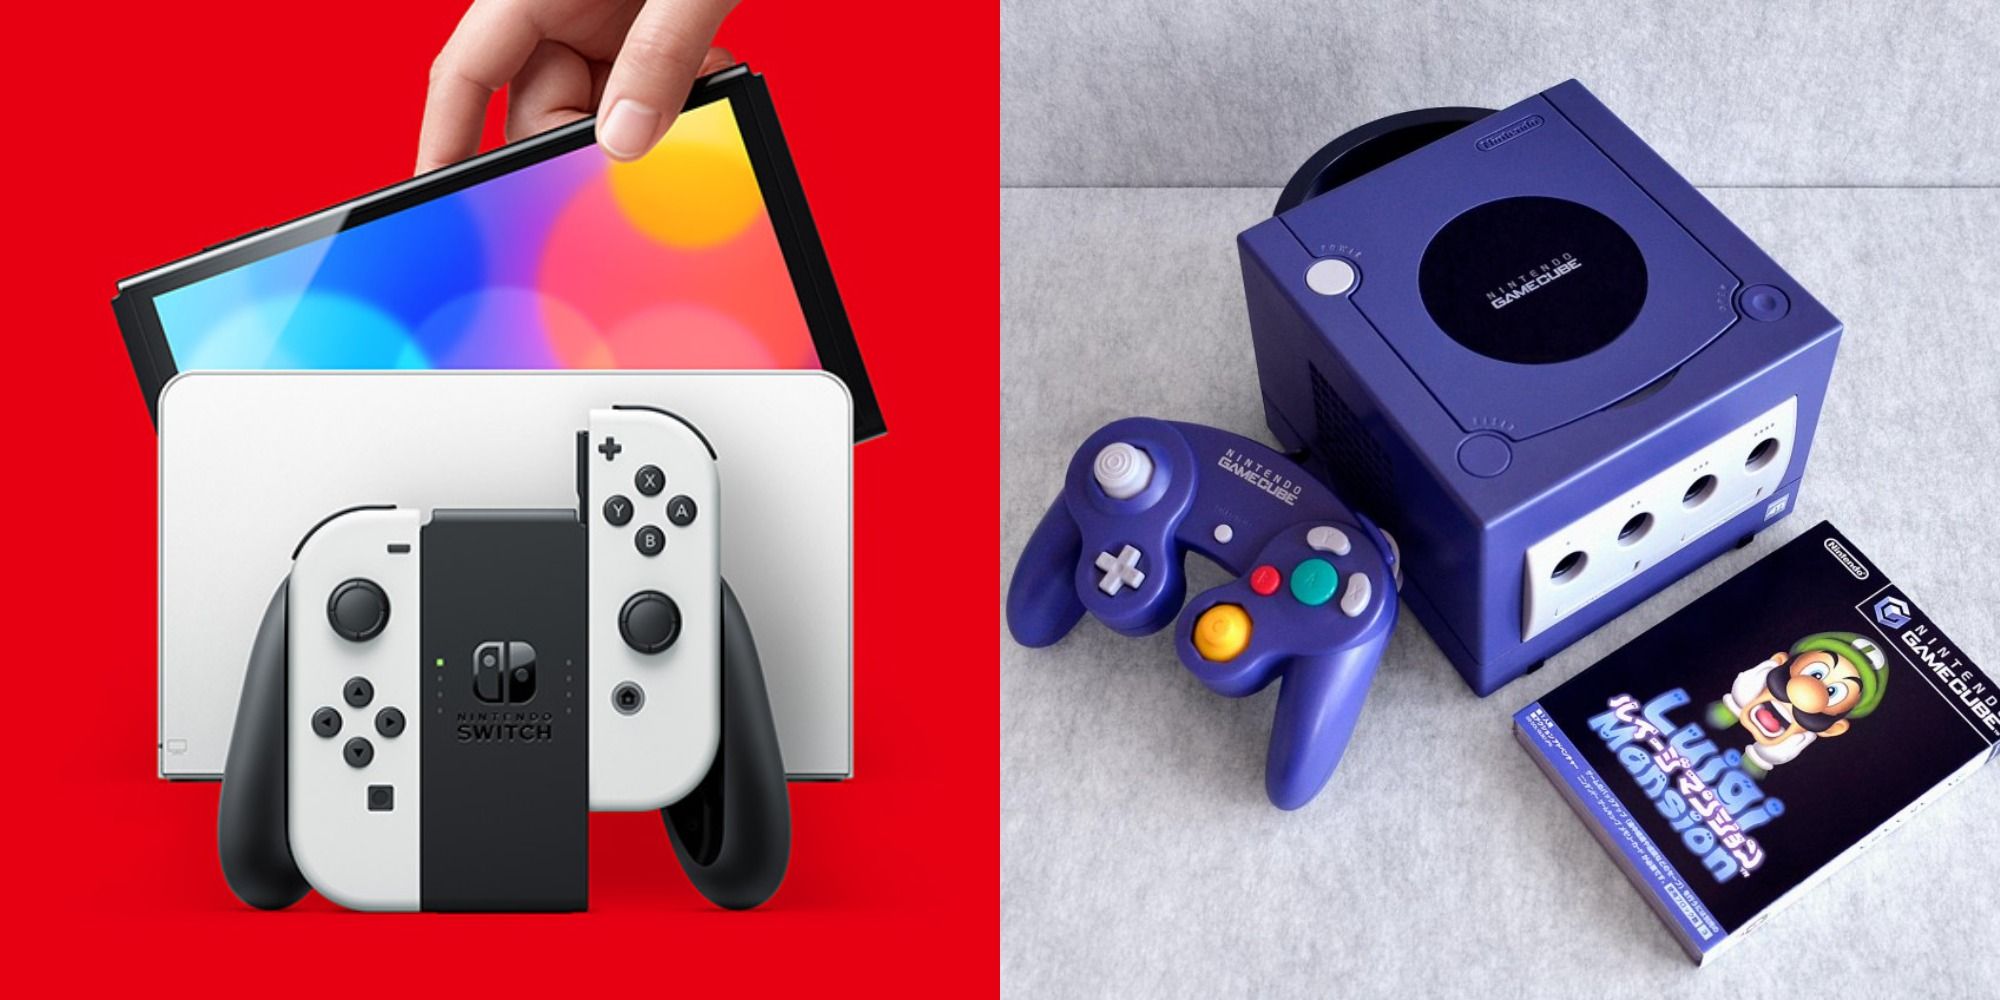 Split image showing the Nintendo Switch and the GameCube